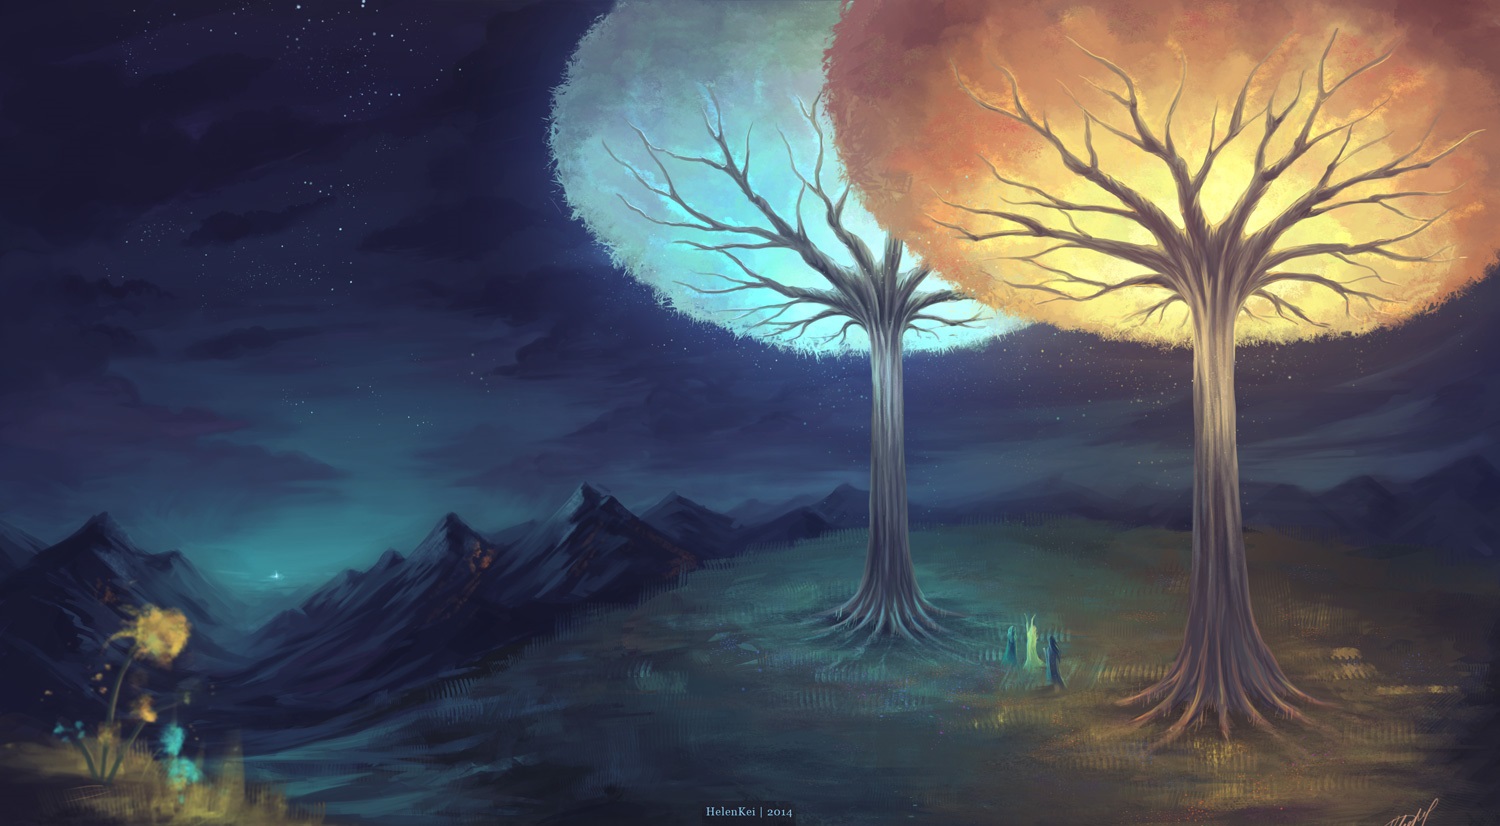 What Are the Two Trees of Valinor in The Lord of the Rings?